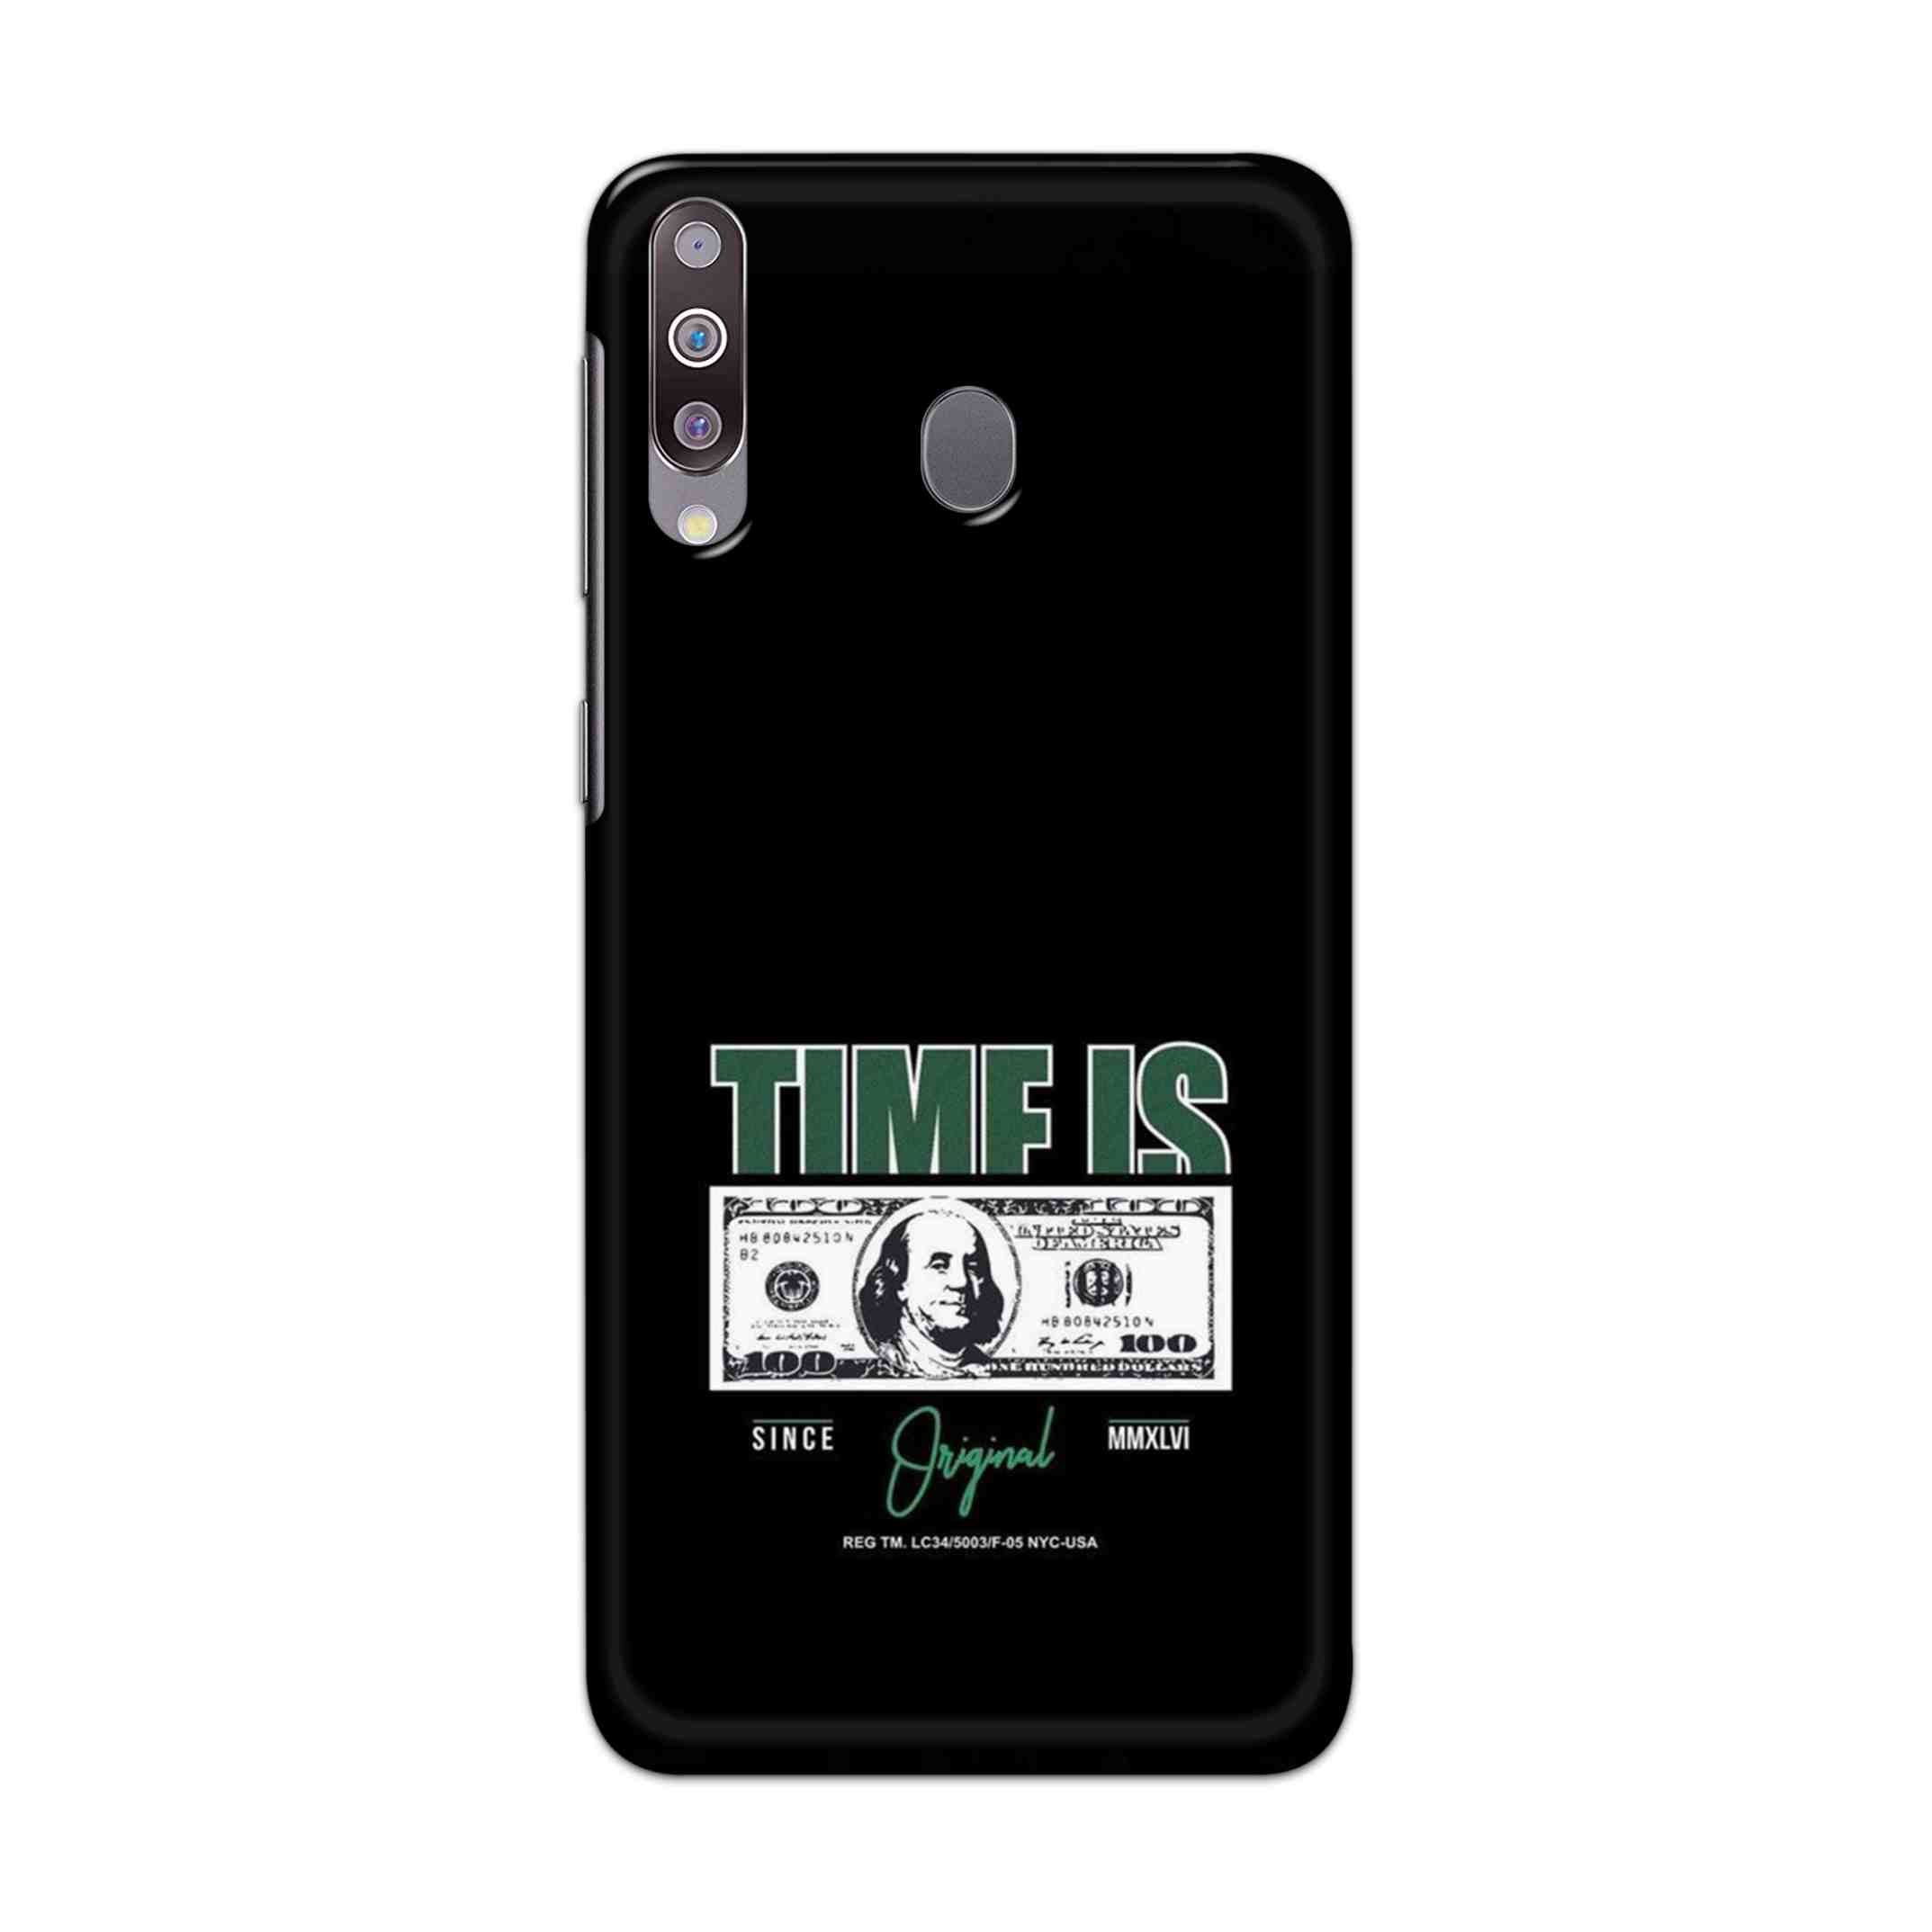 Buy Time Is Money Hard Back Mobile Phone Case Cover For Samsung Galaxy M30 Online